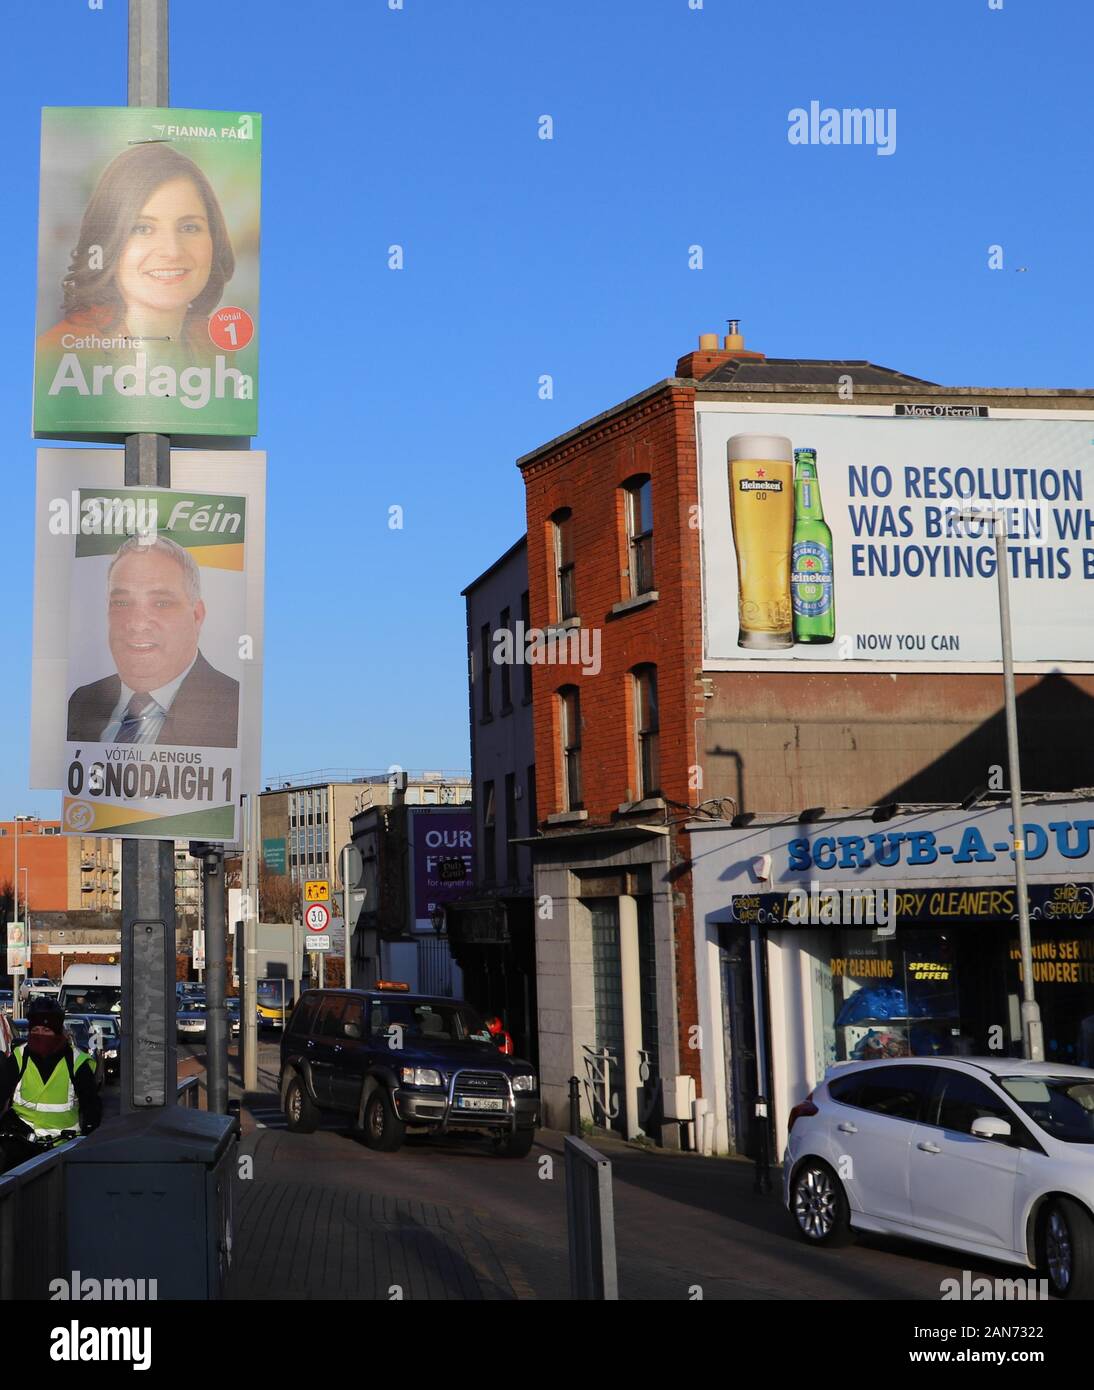 Dublin, Ireland. 15th Jan, 2020. Posters of candidates for the upcoming general election are seen in Dublin, Ireland, Jan. 15, 2020. Irish Prime Minister Leo Varadkar announced on Tuesday that the country will hold general election on Feb. 8. Credit: Liu Xiaoming/Xinhua/Alamy Live News Stock Photo